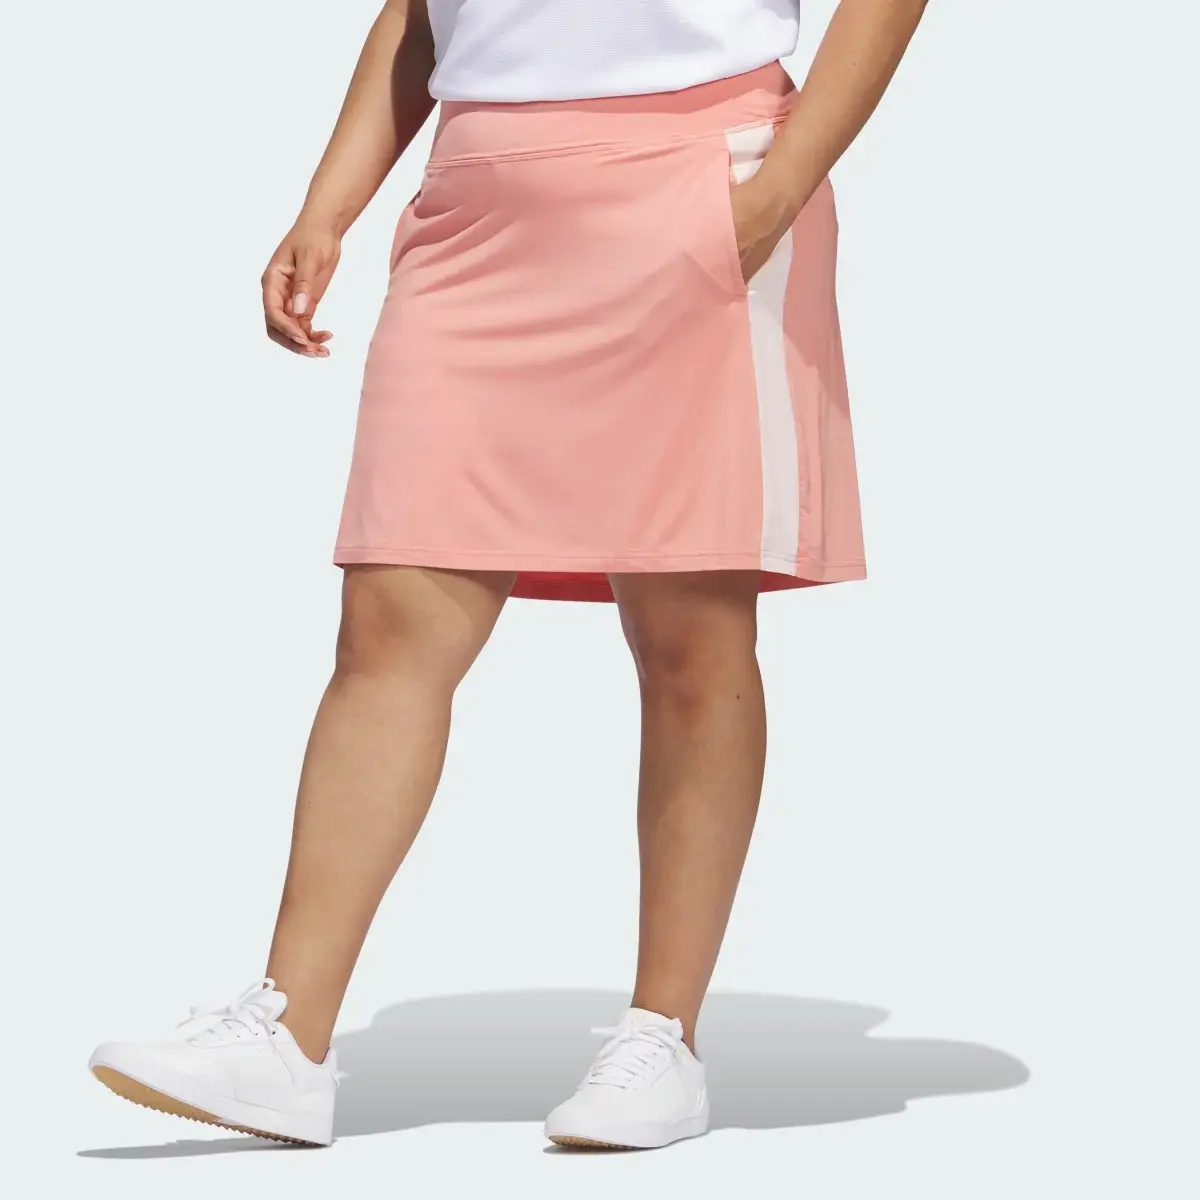 Adidas Made With Nature Golf Skort (Plus Size). 1